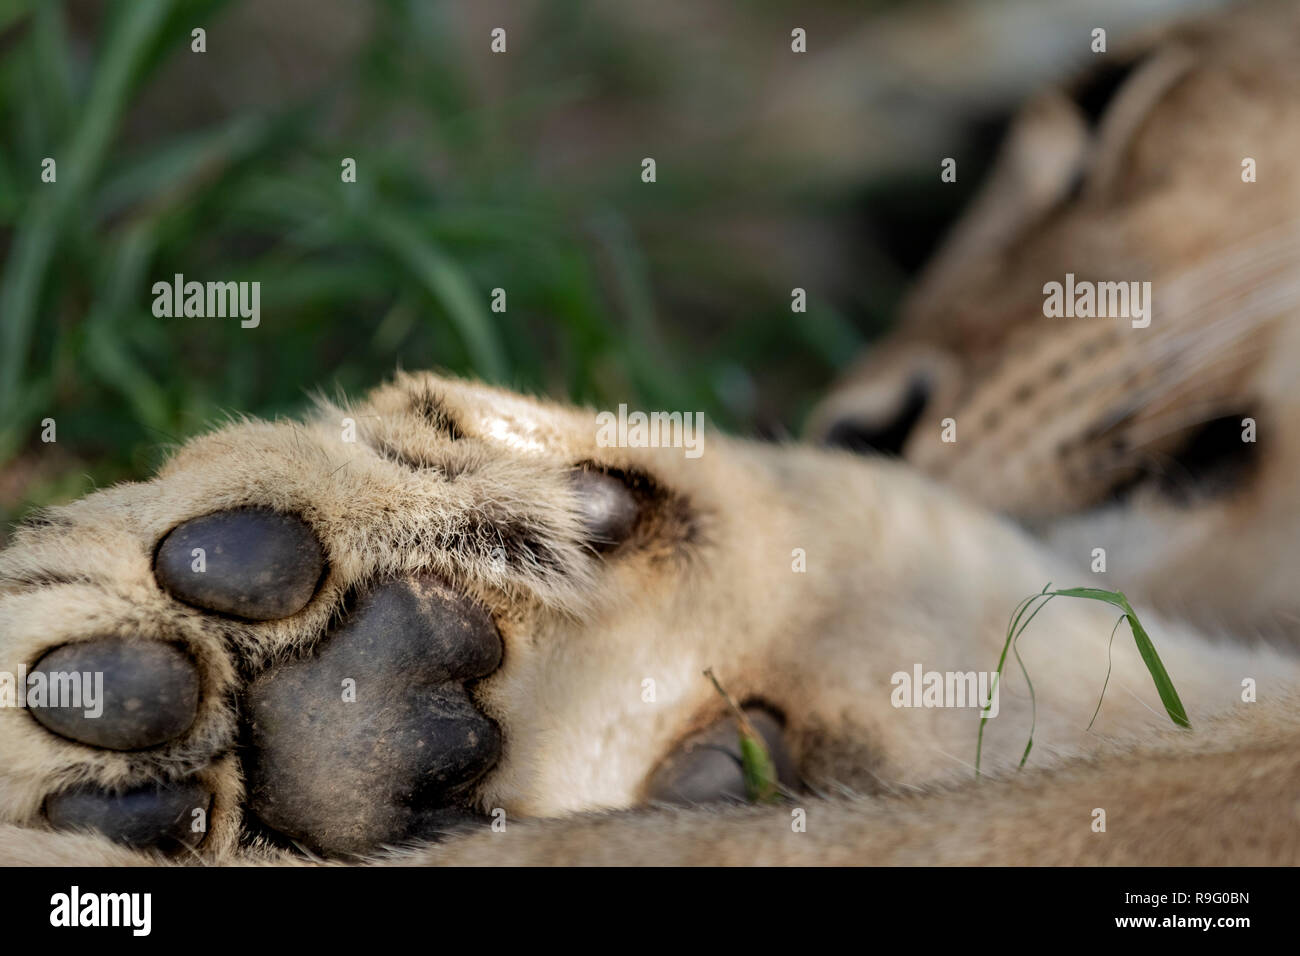 extreme close up of the paw of a sleeping lion, with shallow dept of field Stock Photo